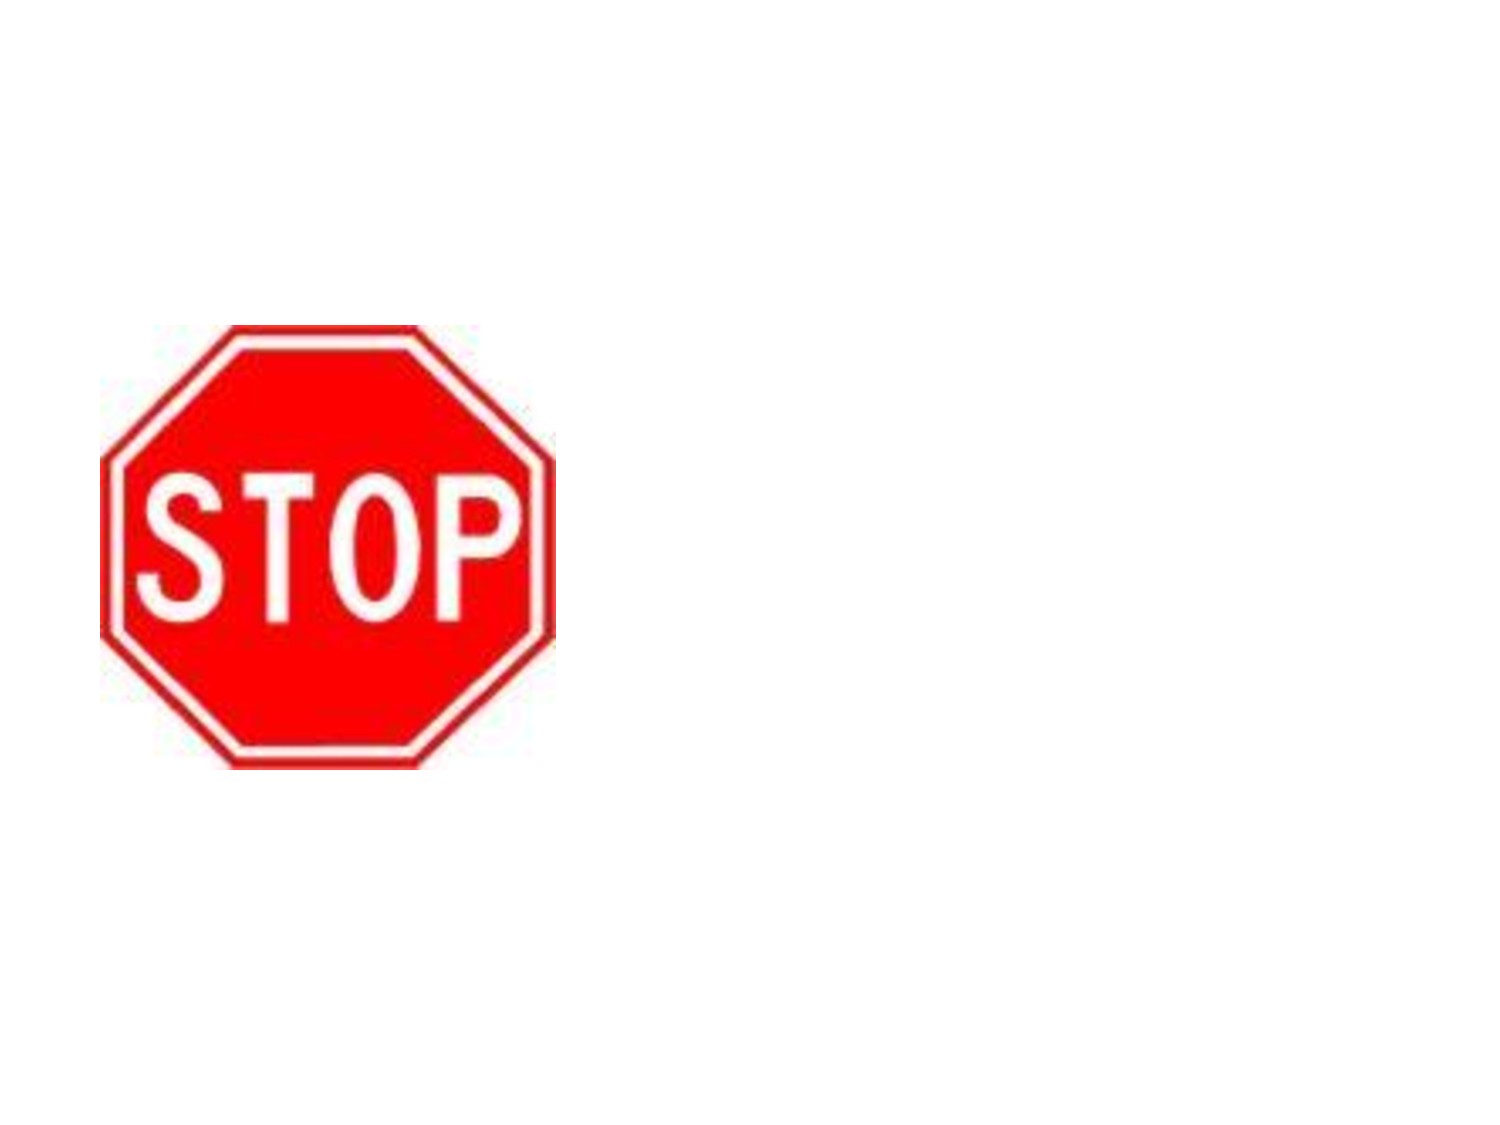 Free Stop Sign Template Printable Download Clip